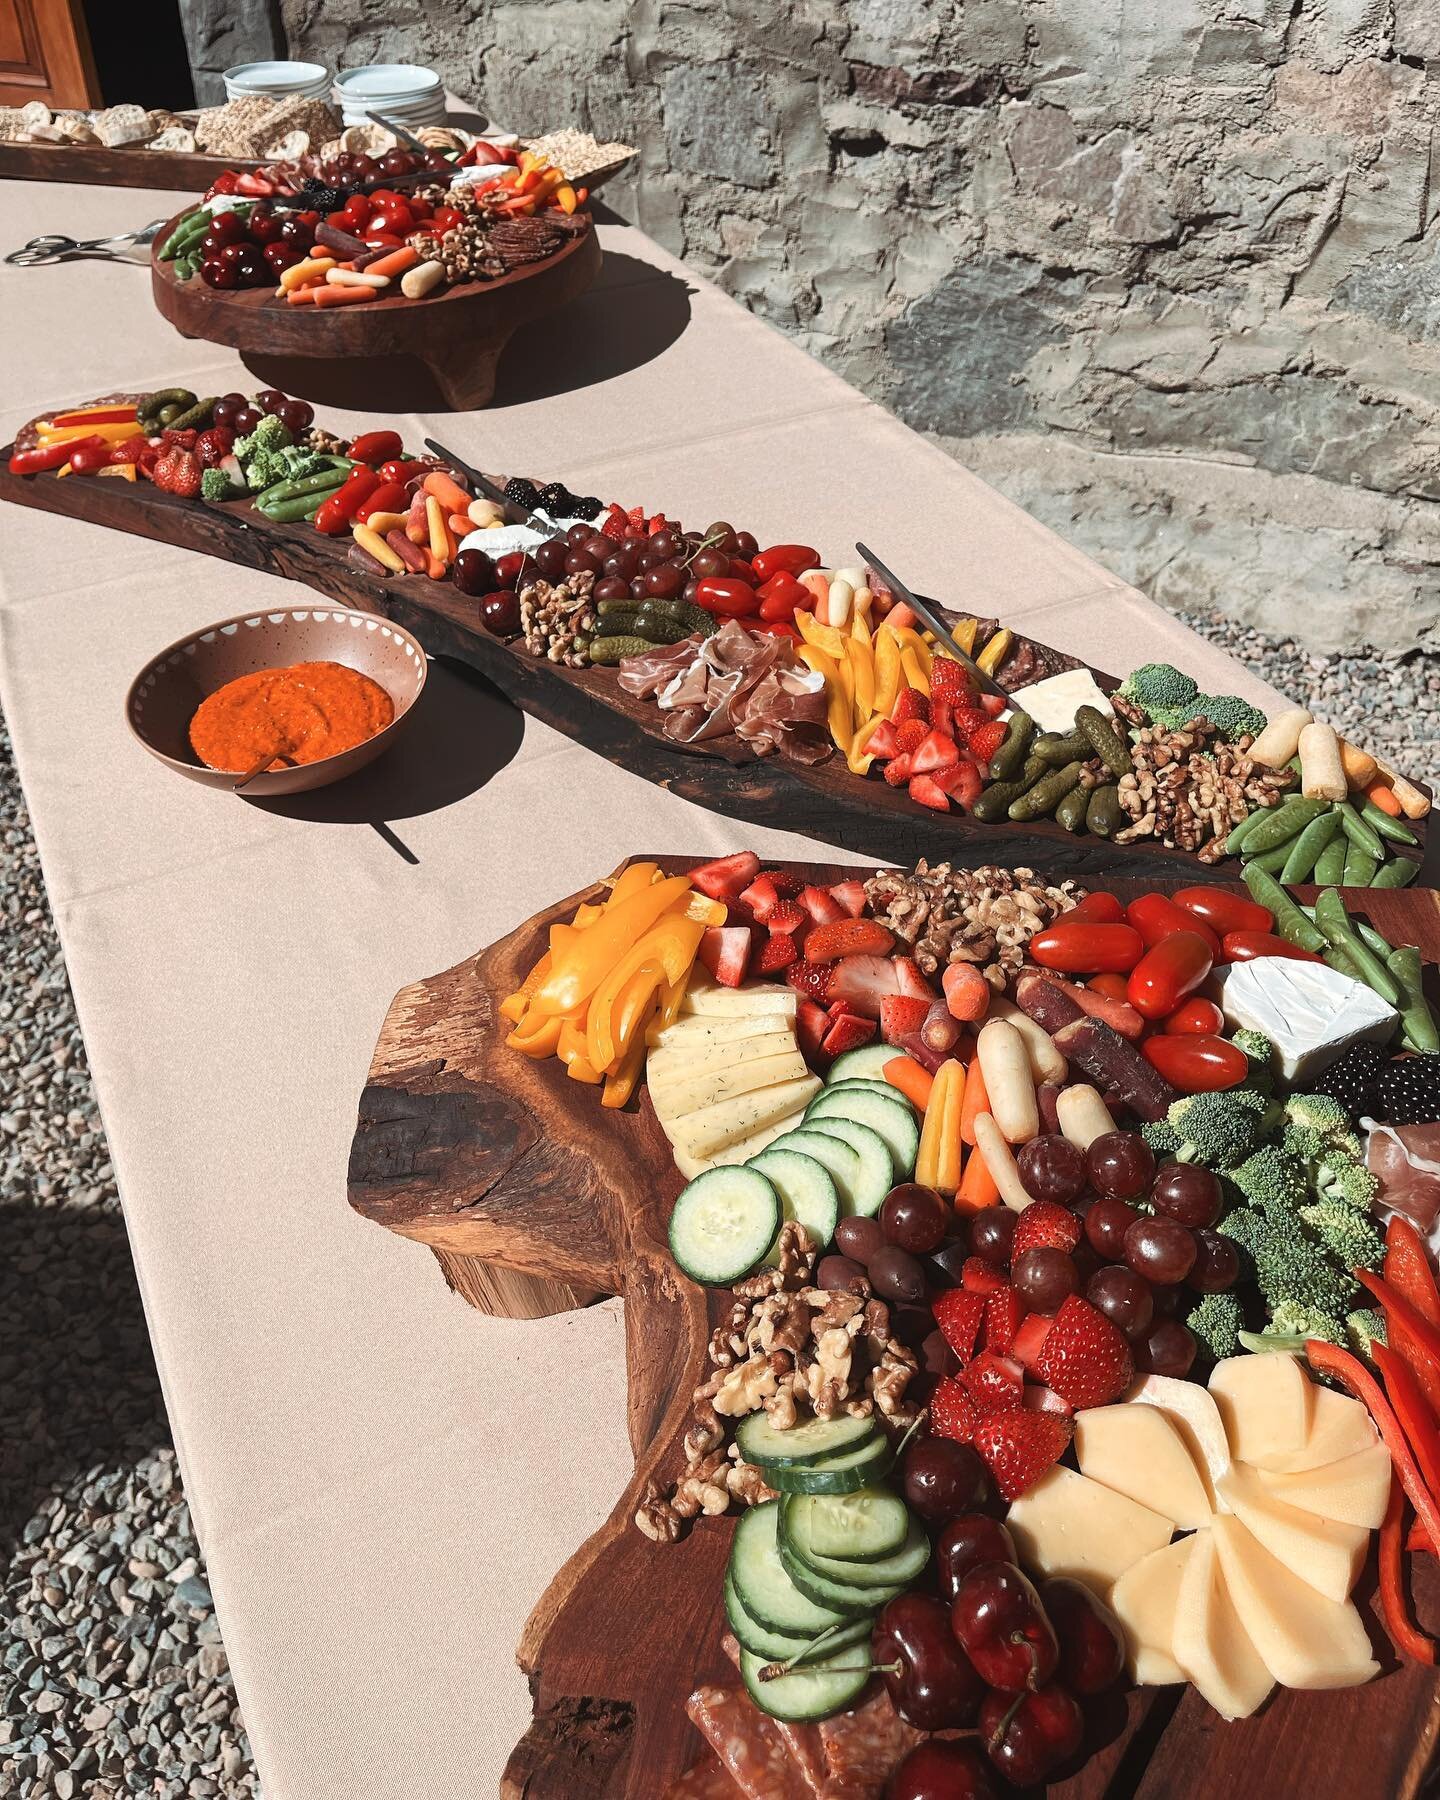 POV: we create a grazing table for cocktail hour at your wedding 🧀 🍇 

#charcuterie #grazingboard #cheeseboard #grazingtable #charcuterieboard #wineandcheese #graze #charcuterieboards #charcuterieplatter #charcuterietable